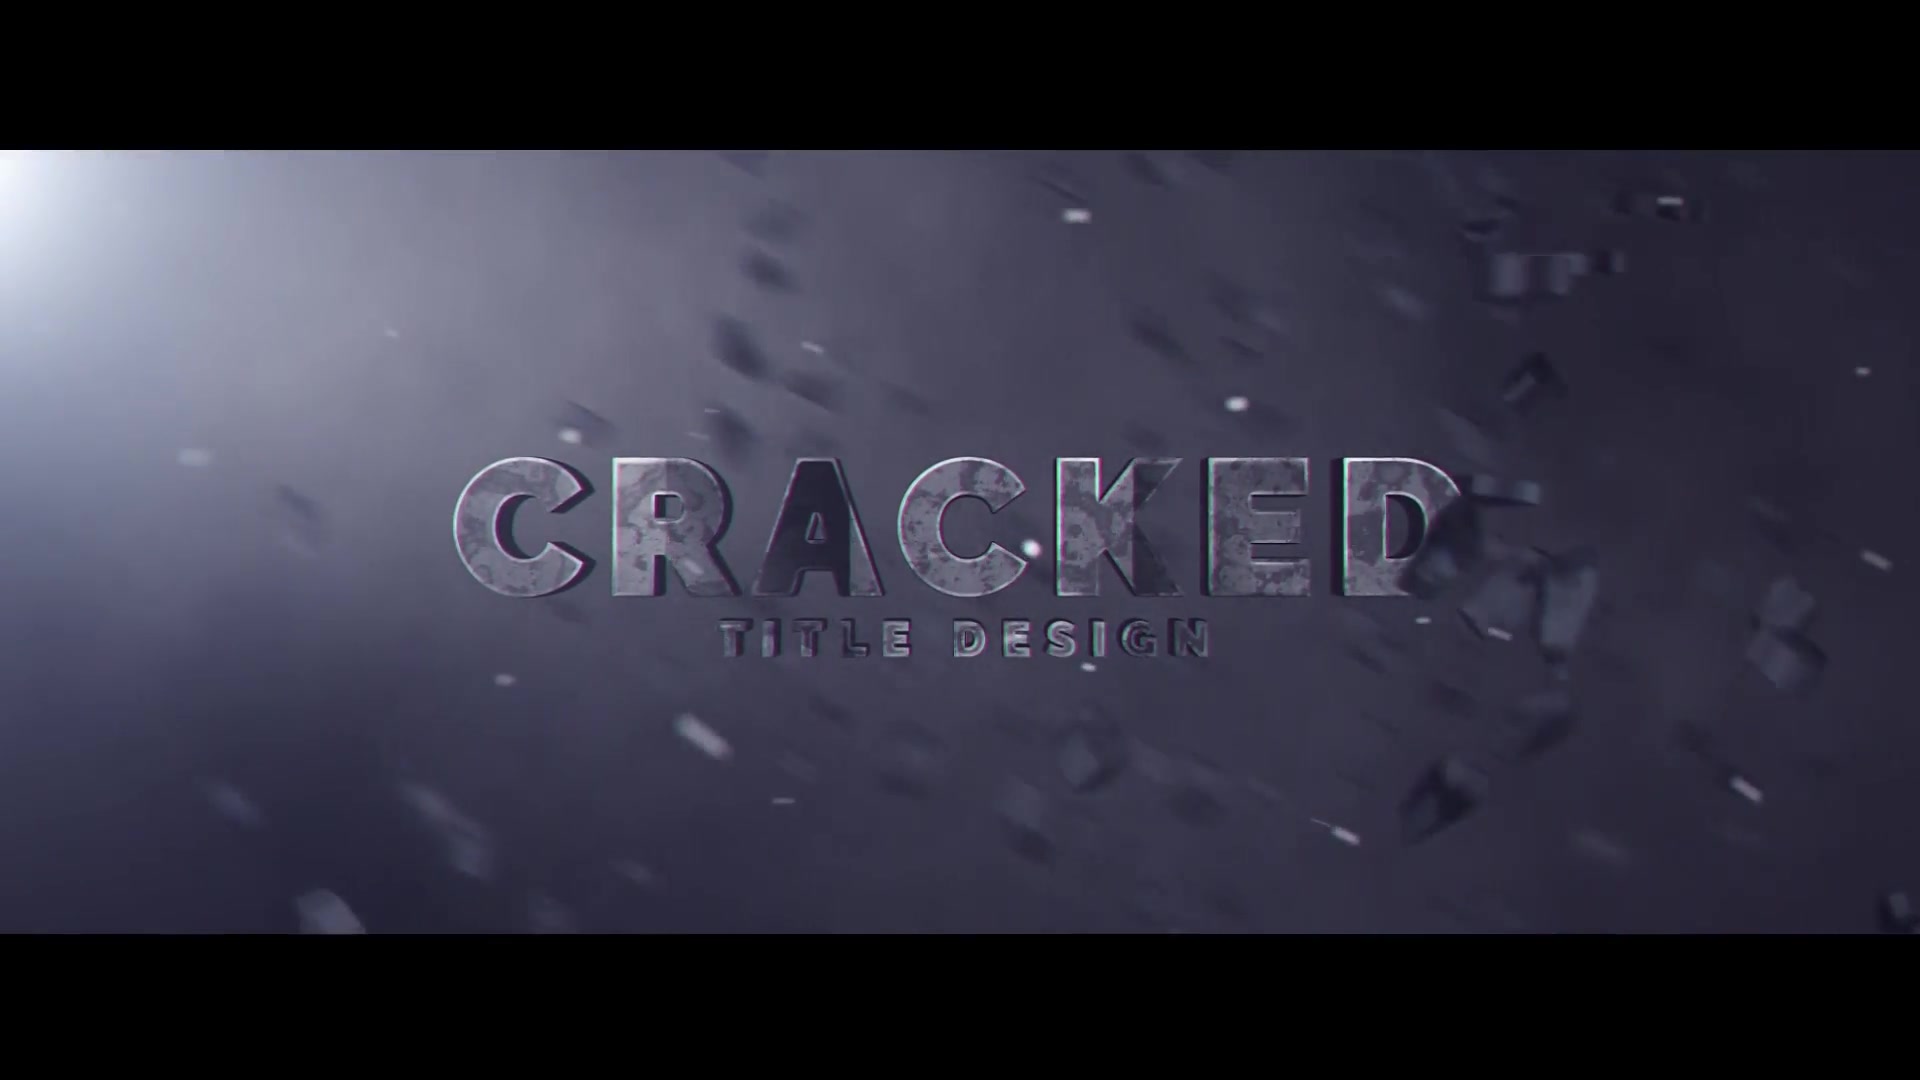 Cracked Title Design - Download Videohive 23194683